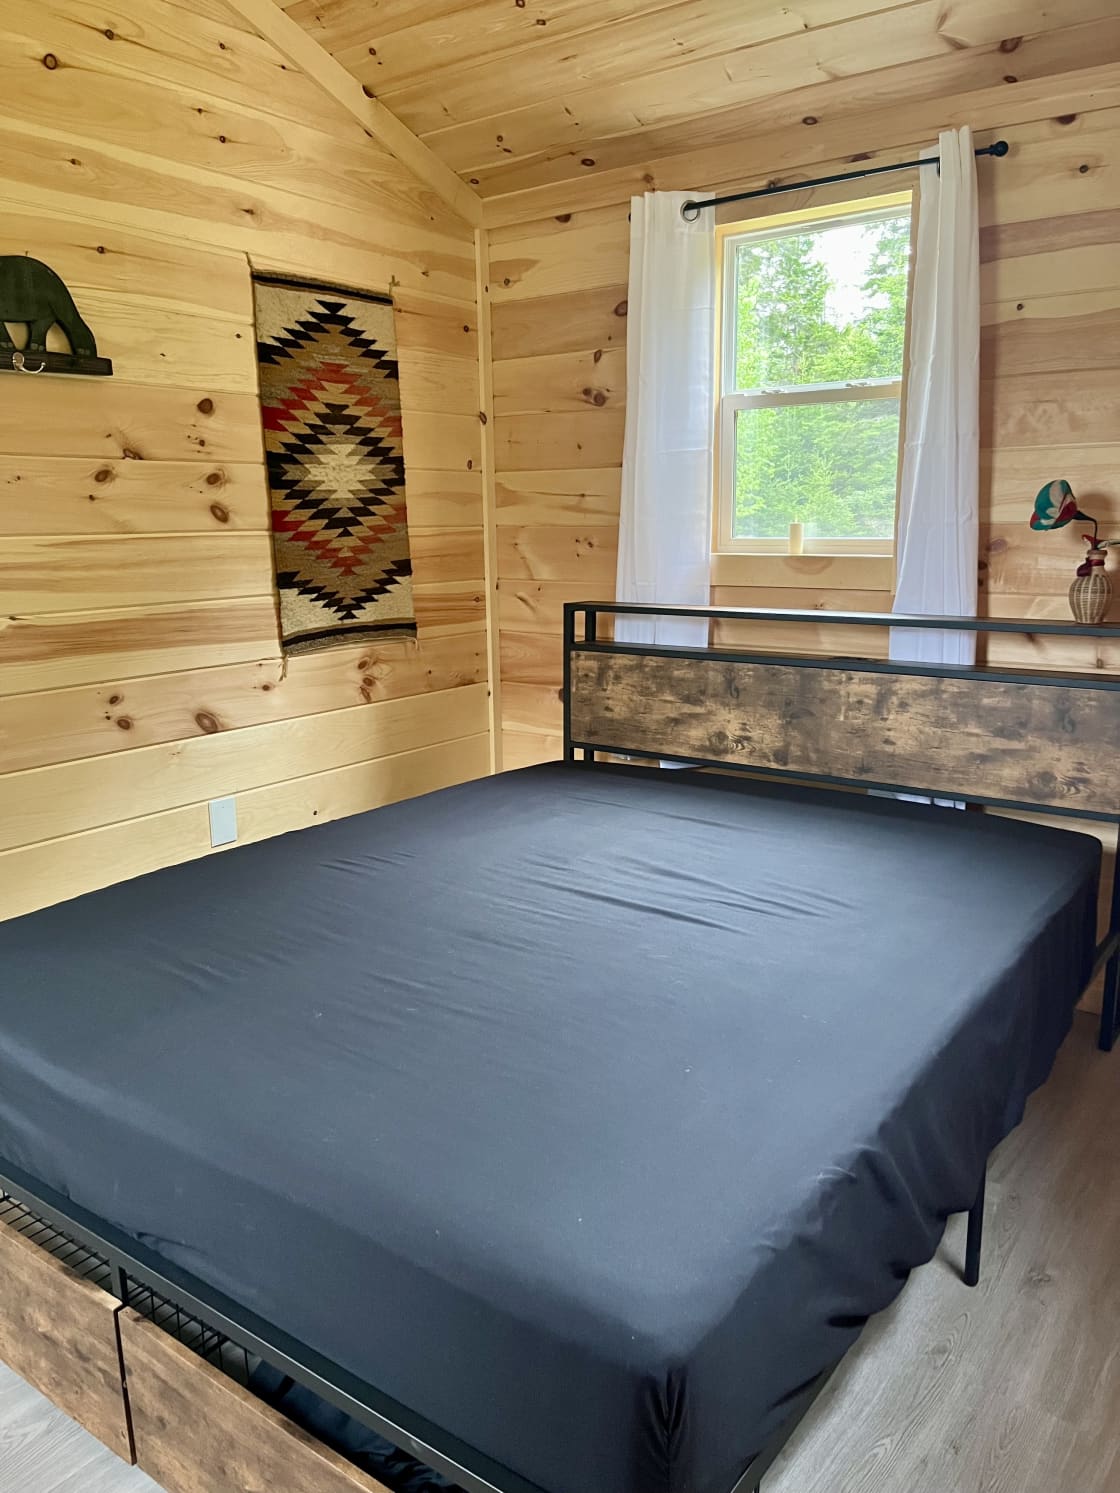 Bedroom with queen-sized bed, fitted sheet over mattress pad, and super comfy mattress.